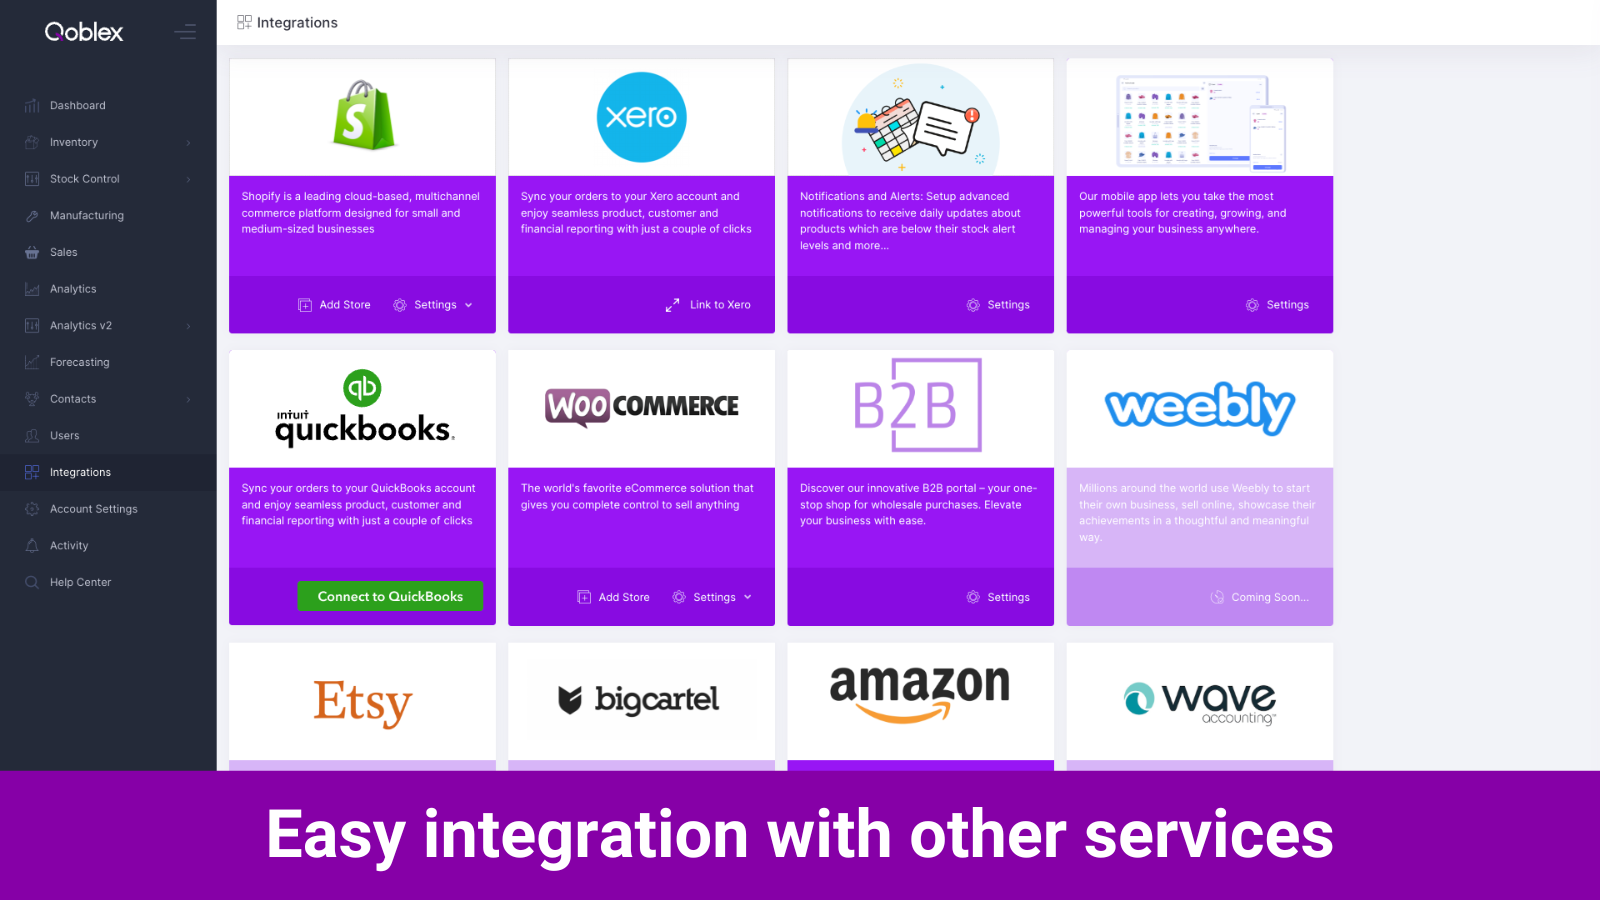 Easy integration with other services